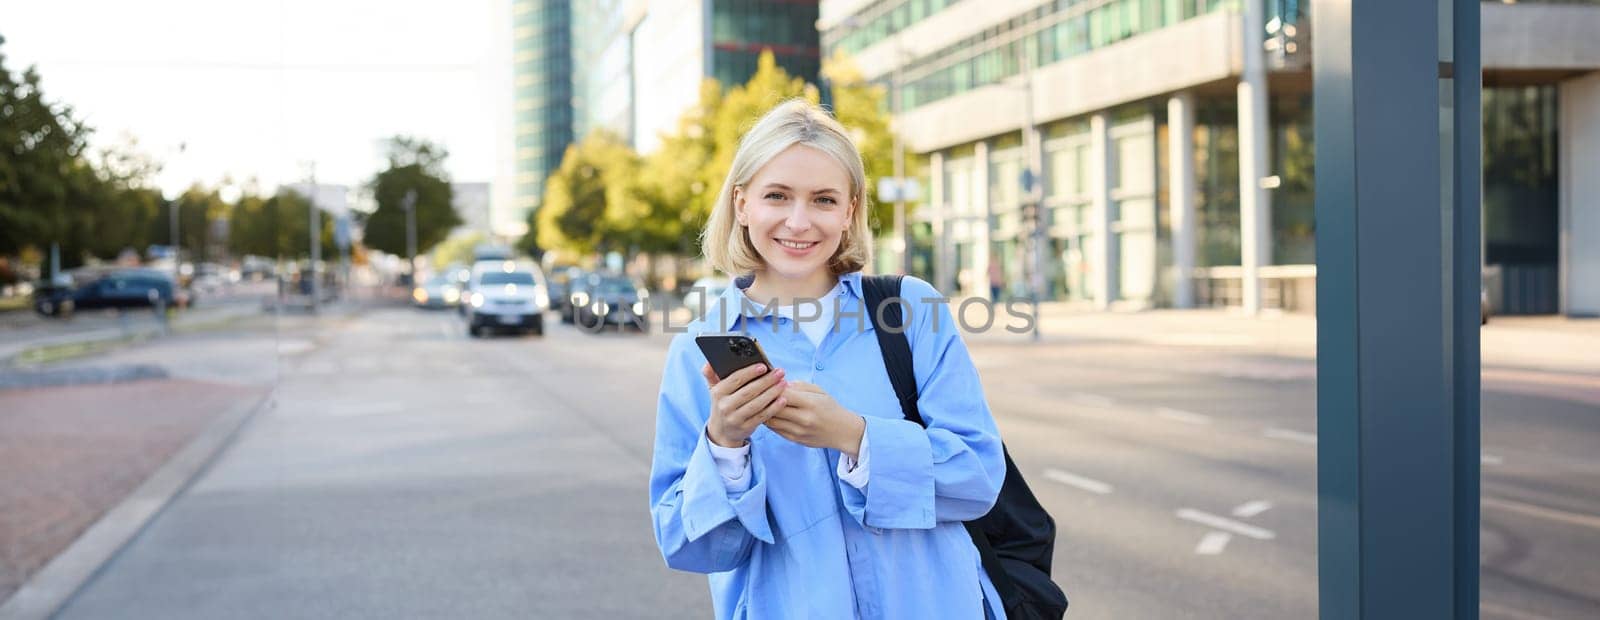 Street style shot of young smiling woman with smartphone, standing on street, bright sunny day, road with cars behind her back, using mobile phone, waiting for someone outdoors.